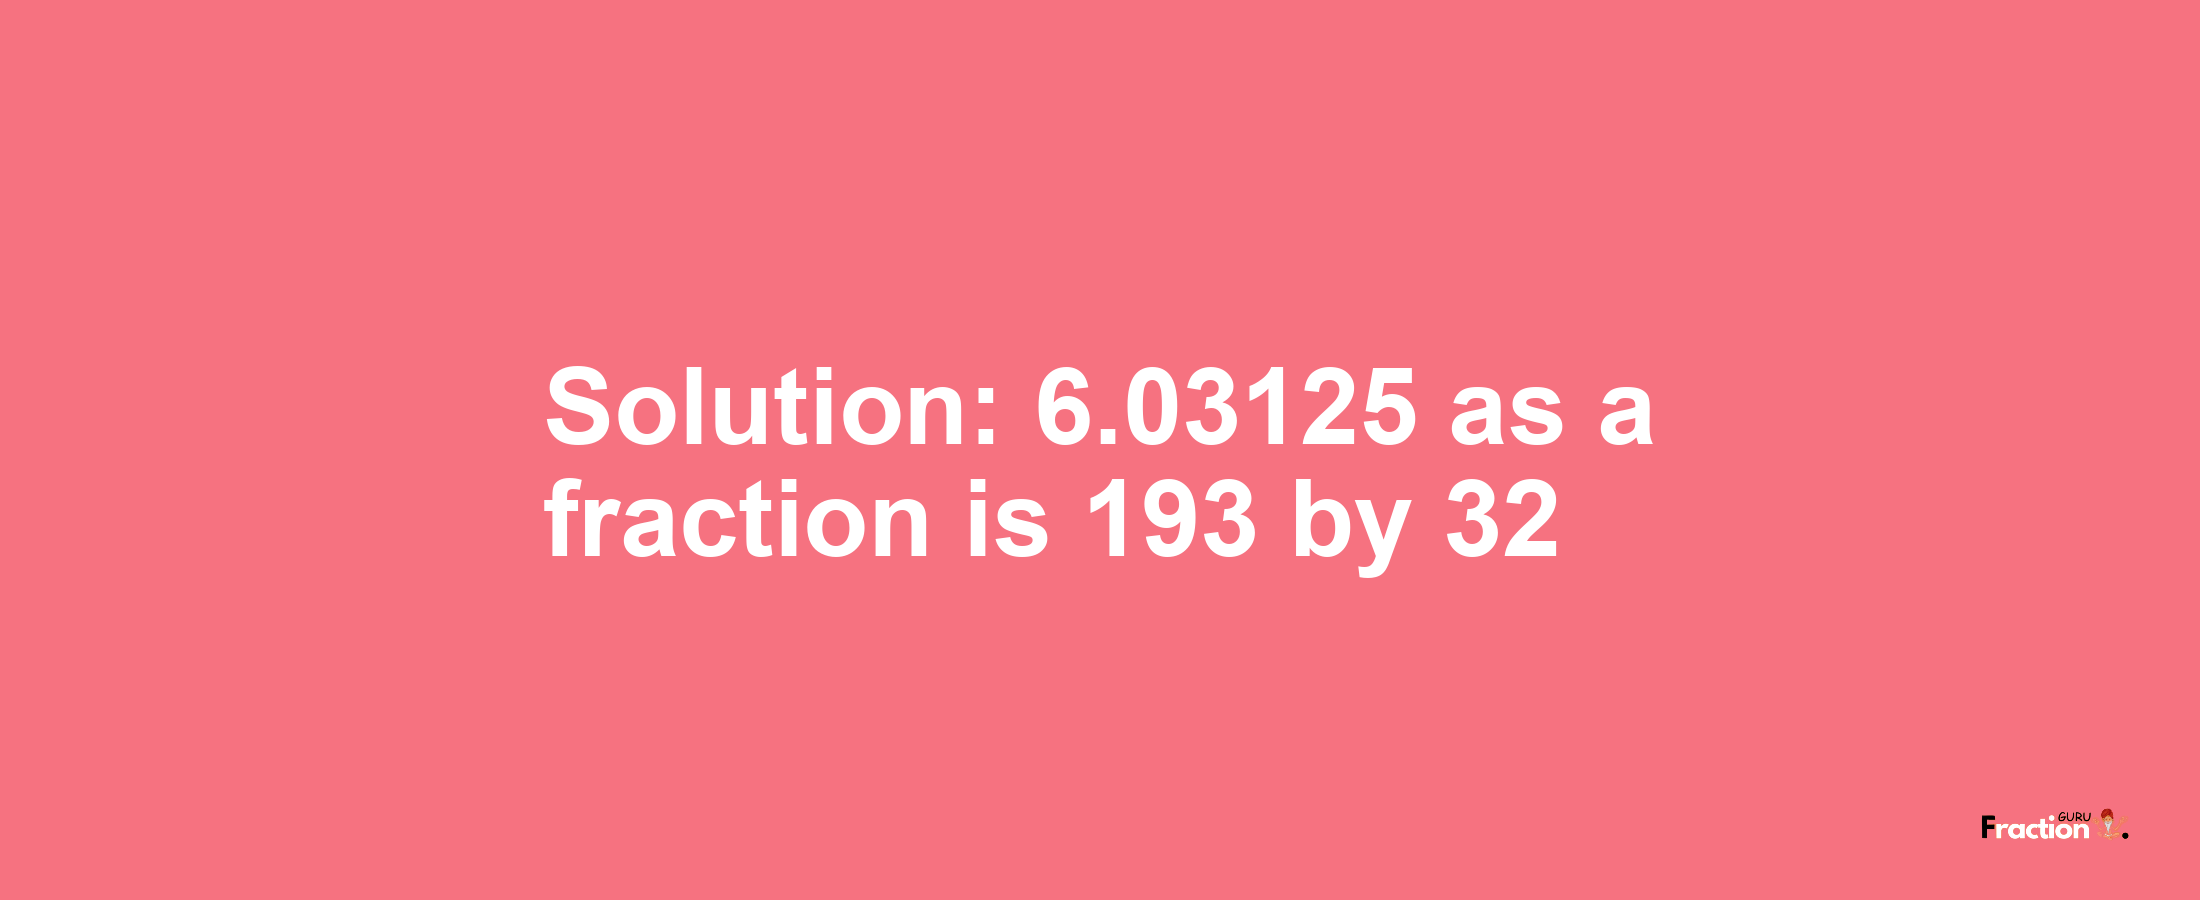 Solution:6.03125 as a fraction is 193/32